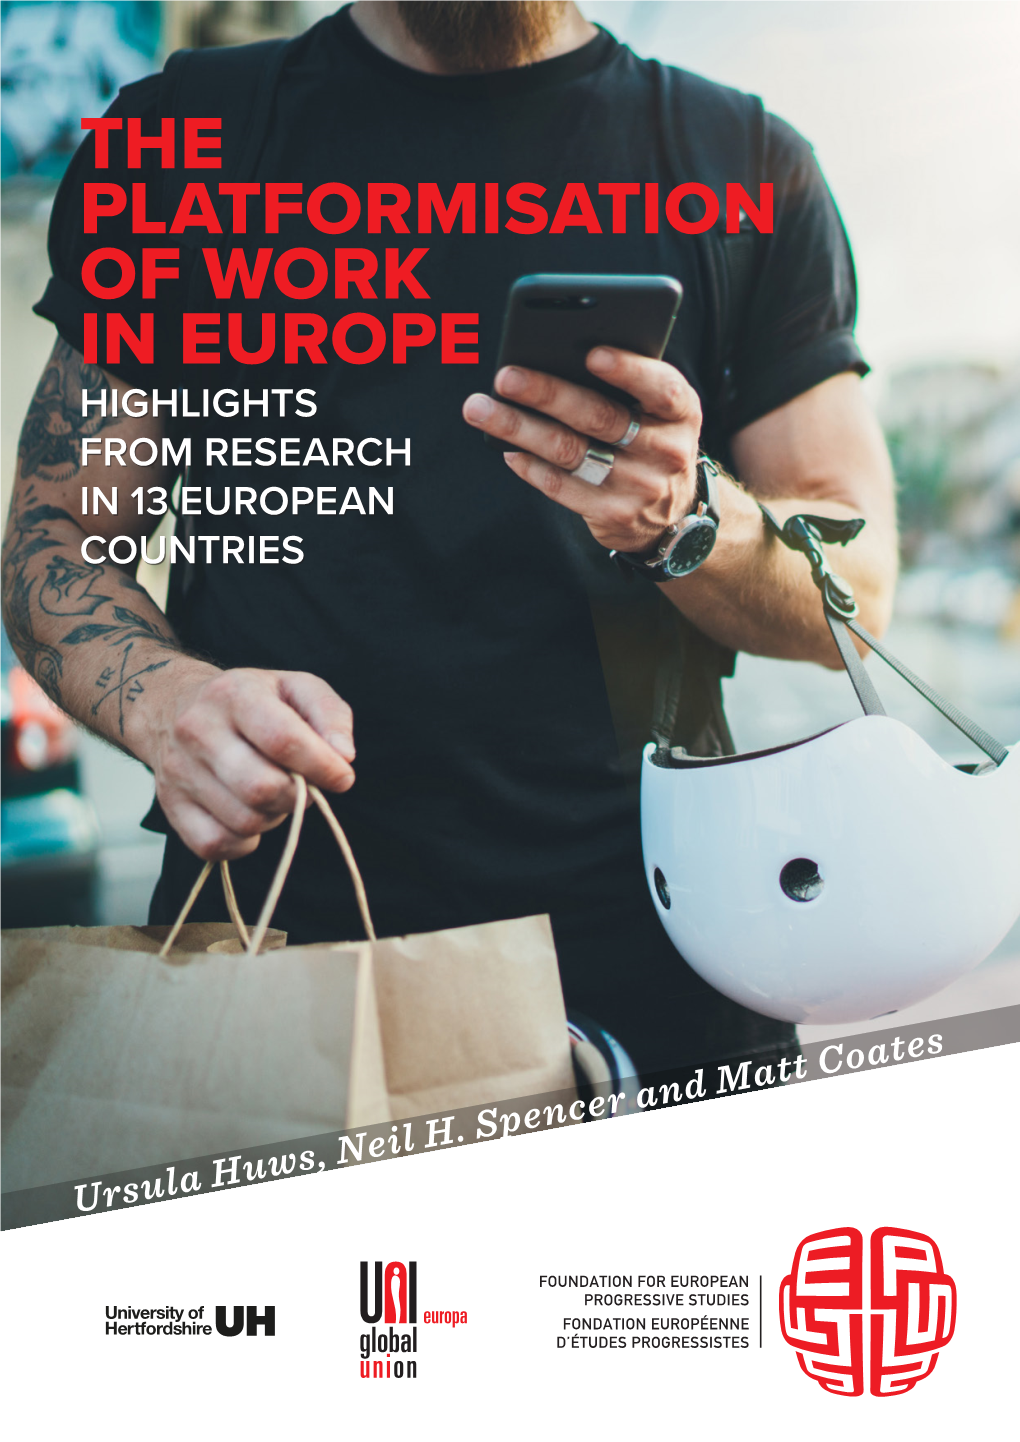 The Platformisation of Work in Europe: Highlights from Research in 13 European Countries